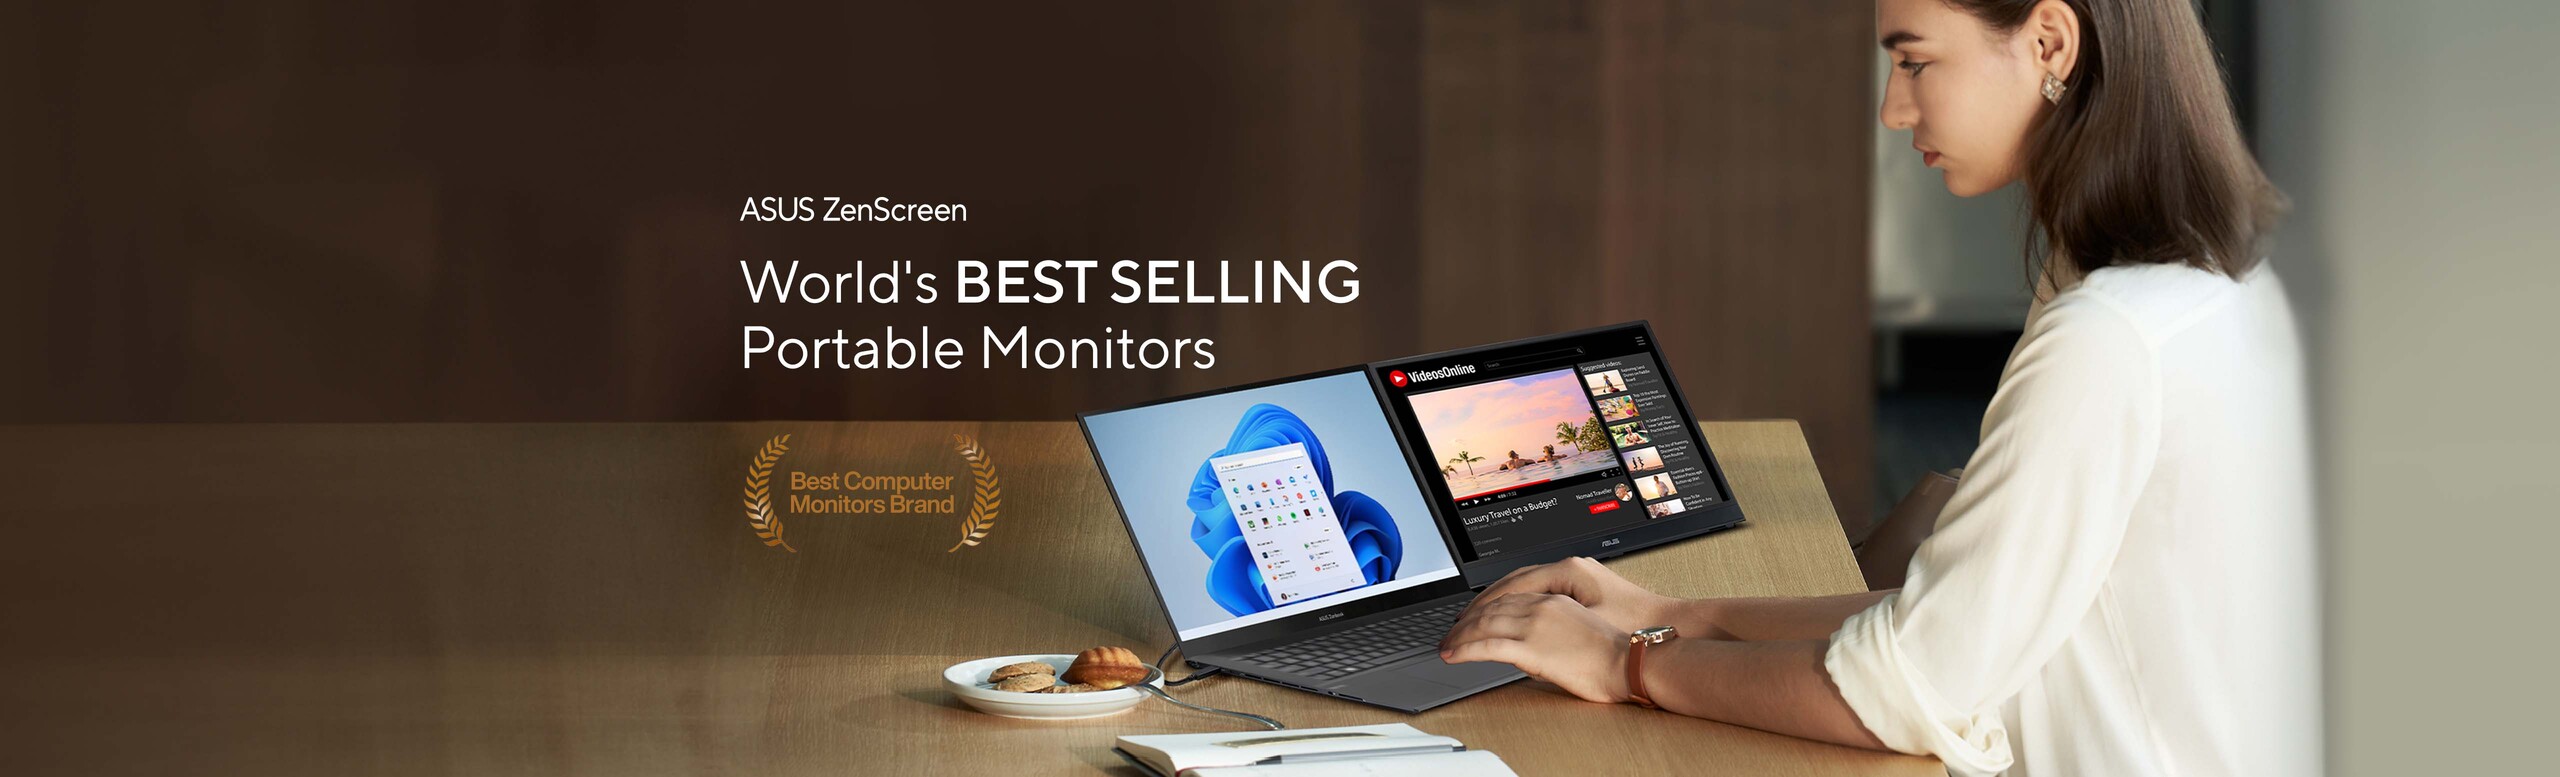 The world's best-selling travel monitor, the ASUS ZenScreen portable monitor is a slime & lightweight external monitor for productivity on the go.